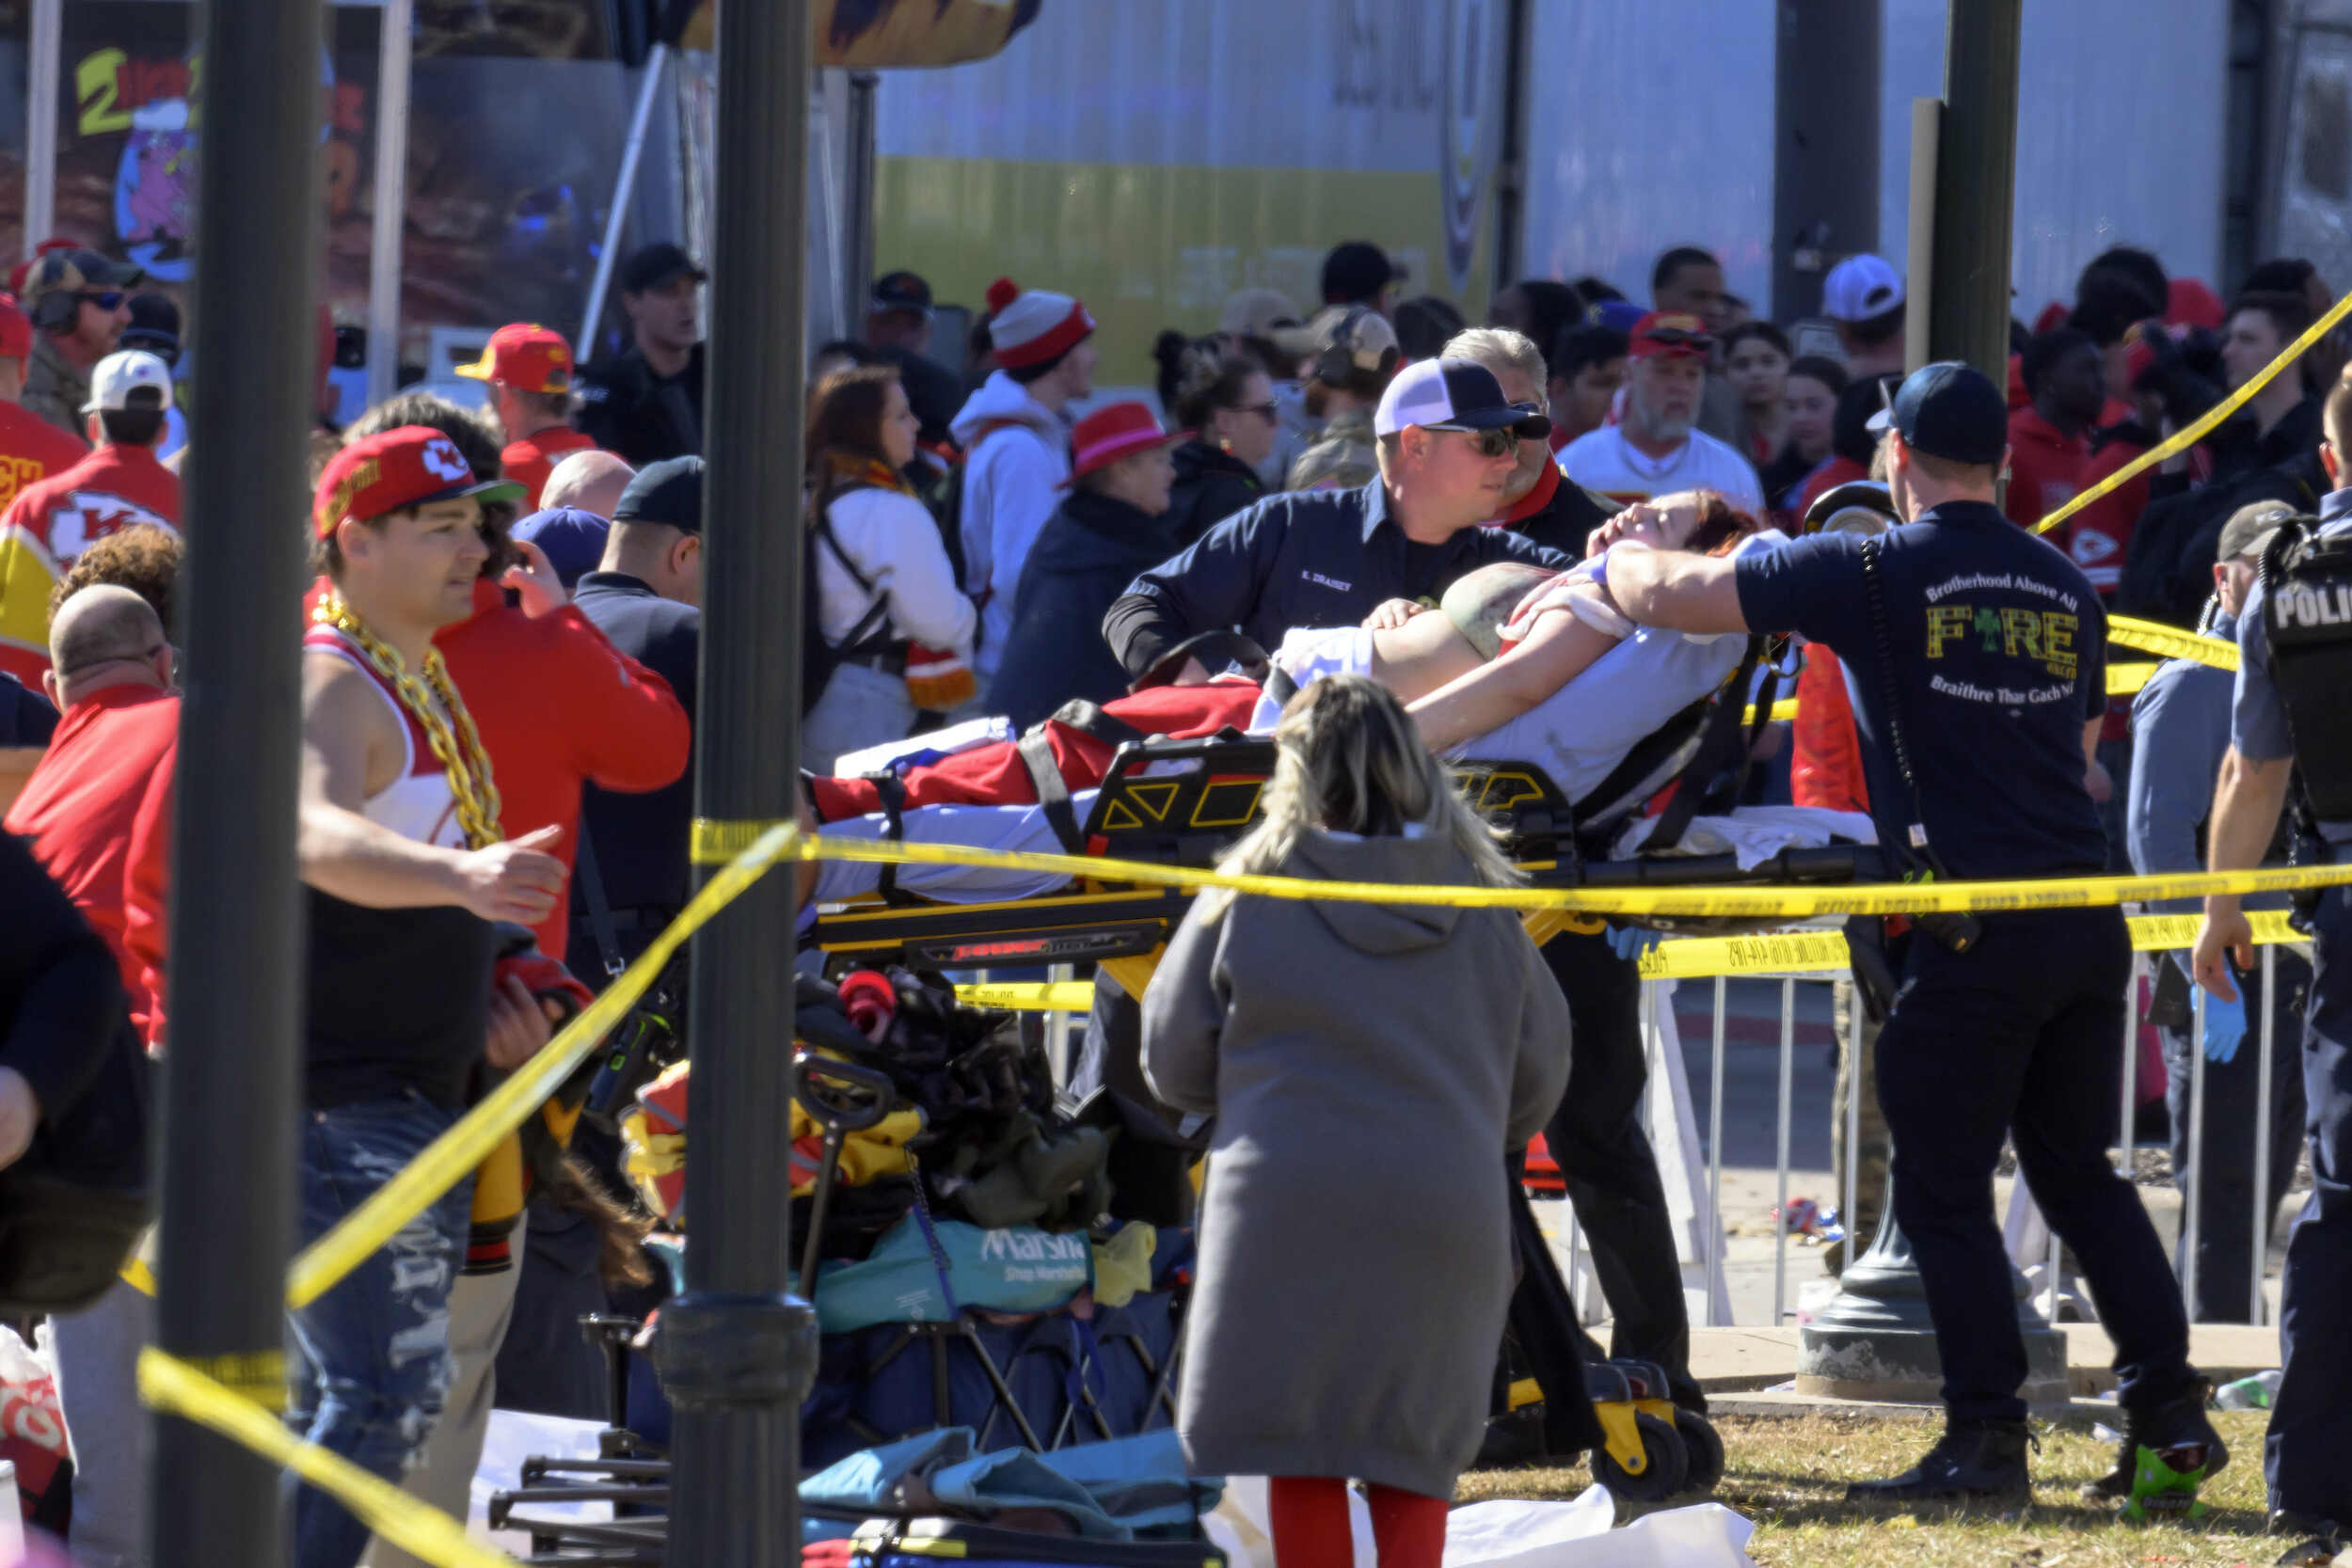 Chiefs’ Super Bowl Parade Turns Horrifying As Gunshots Erupt, Multiple Victims Wounded